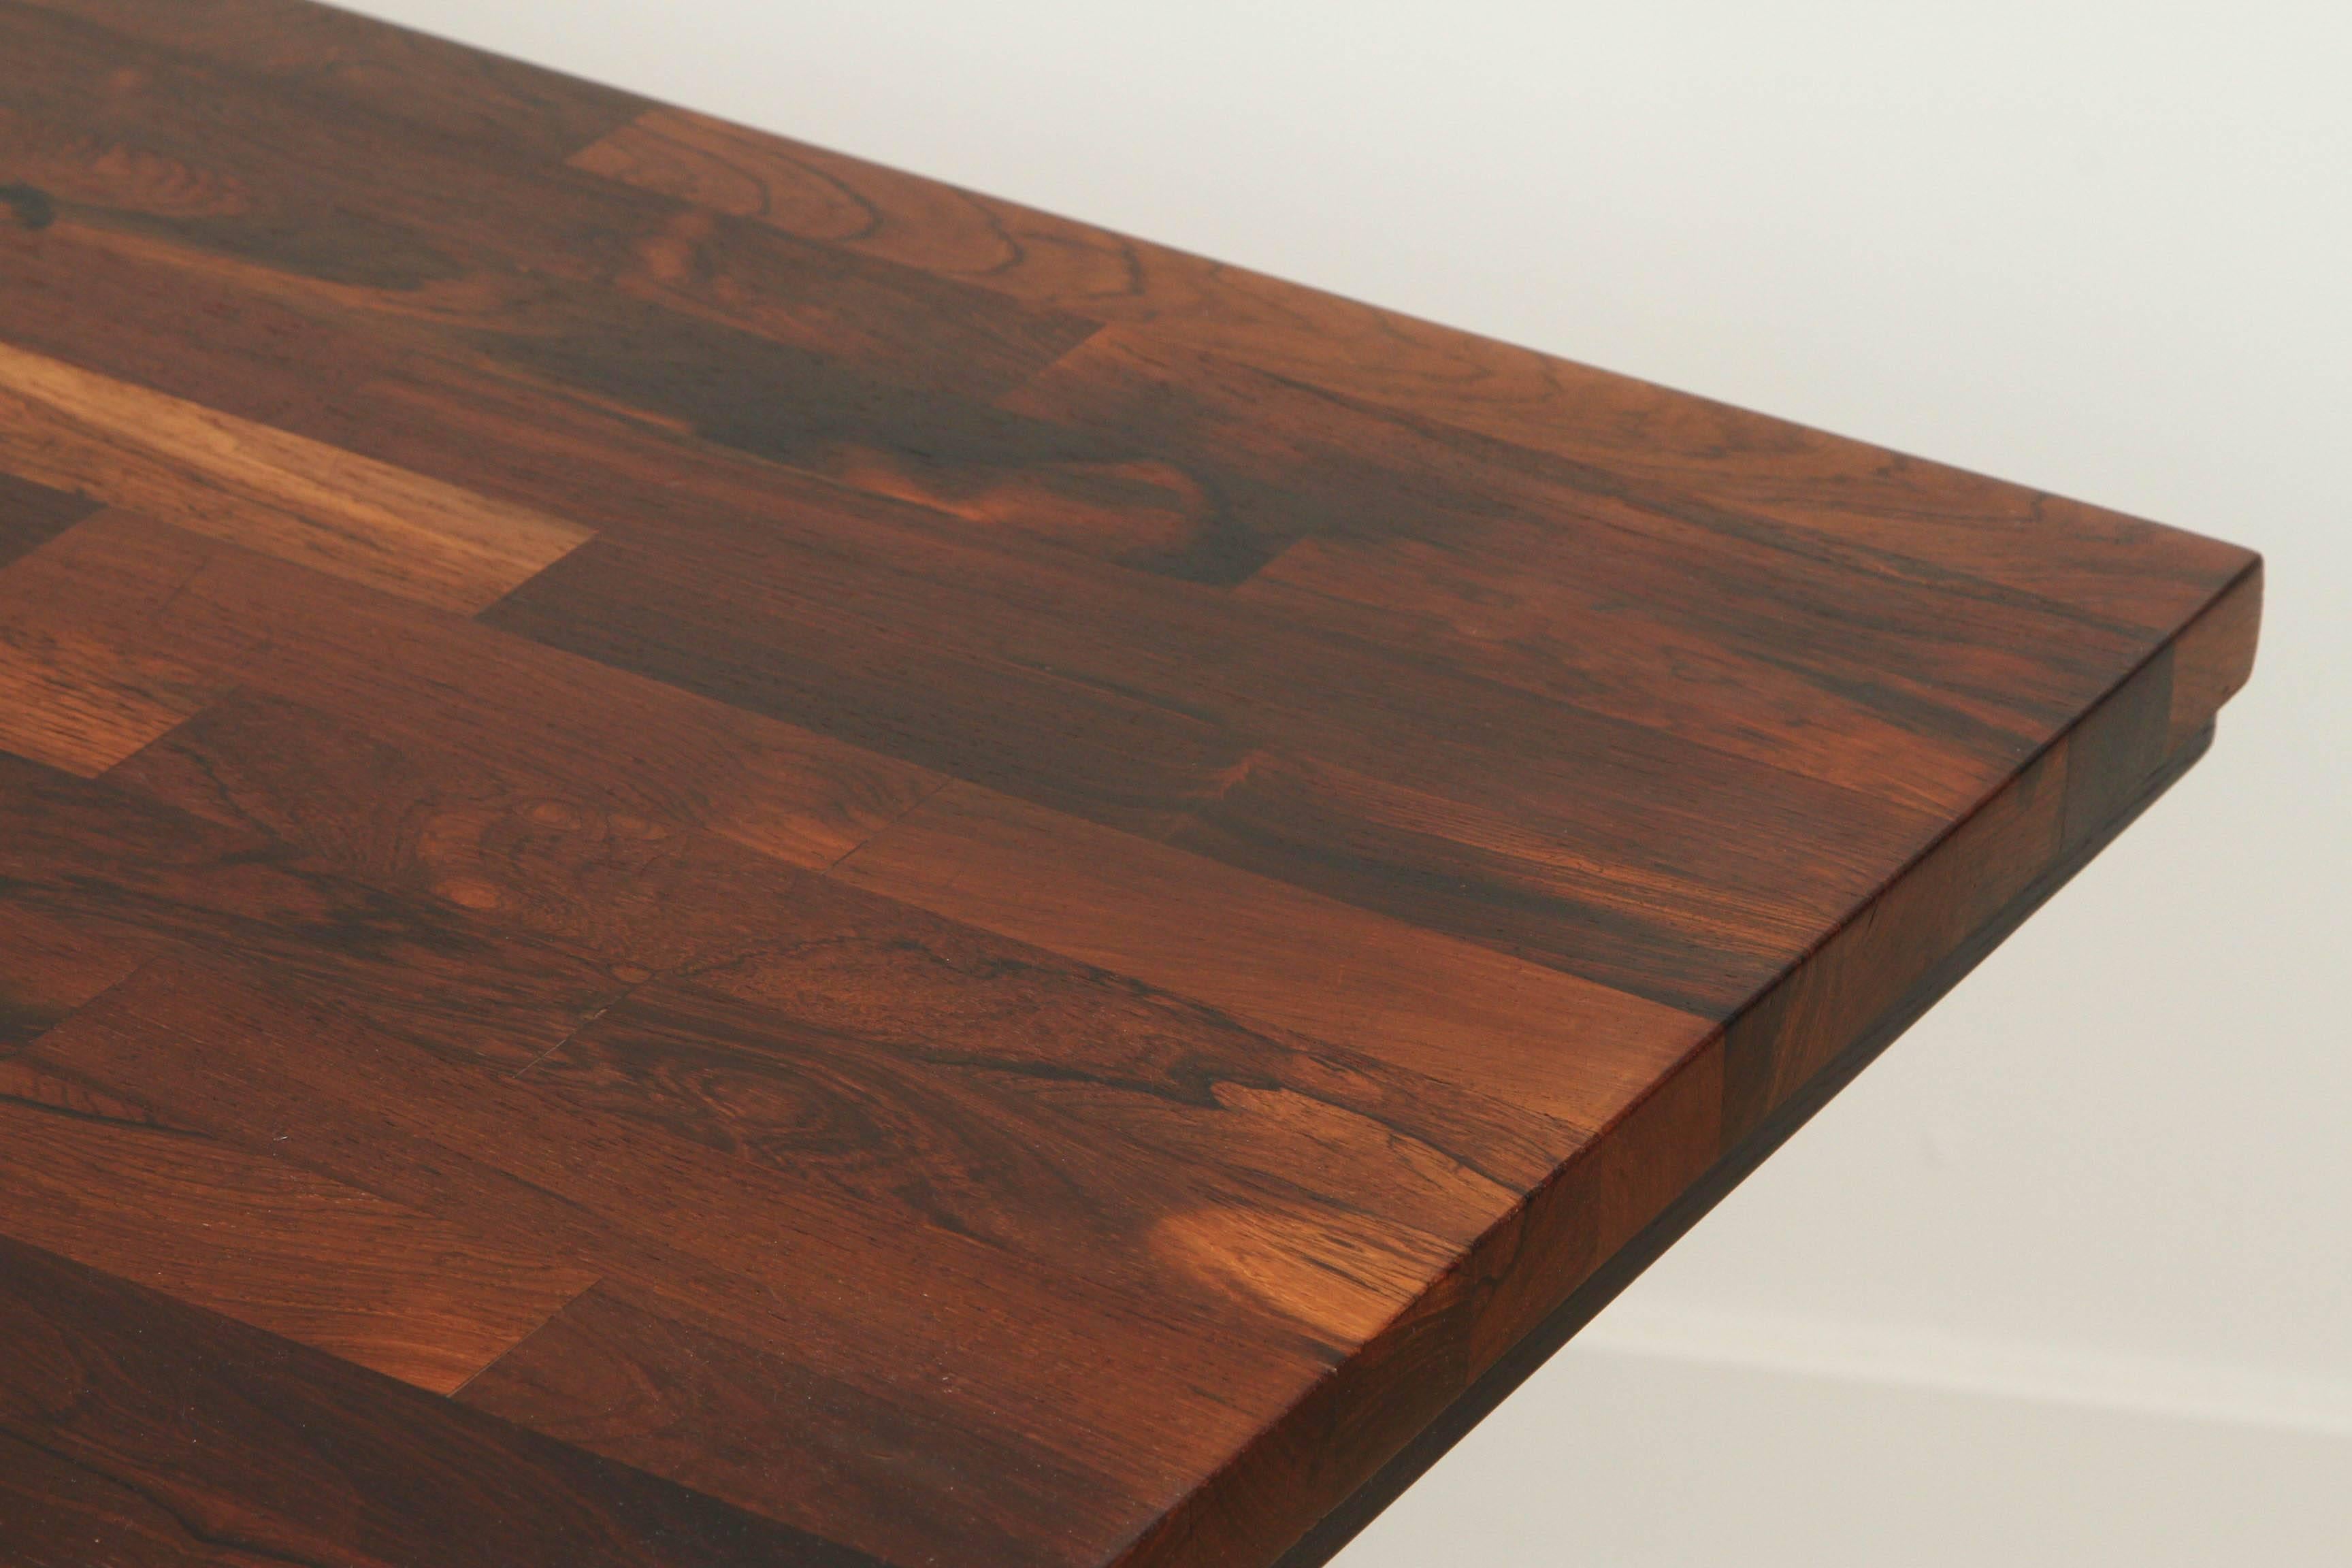 Solid Rosewood Desk with Stainless Base by Jules Heumann for Metropolitan Group 2